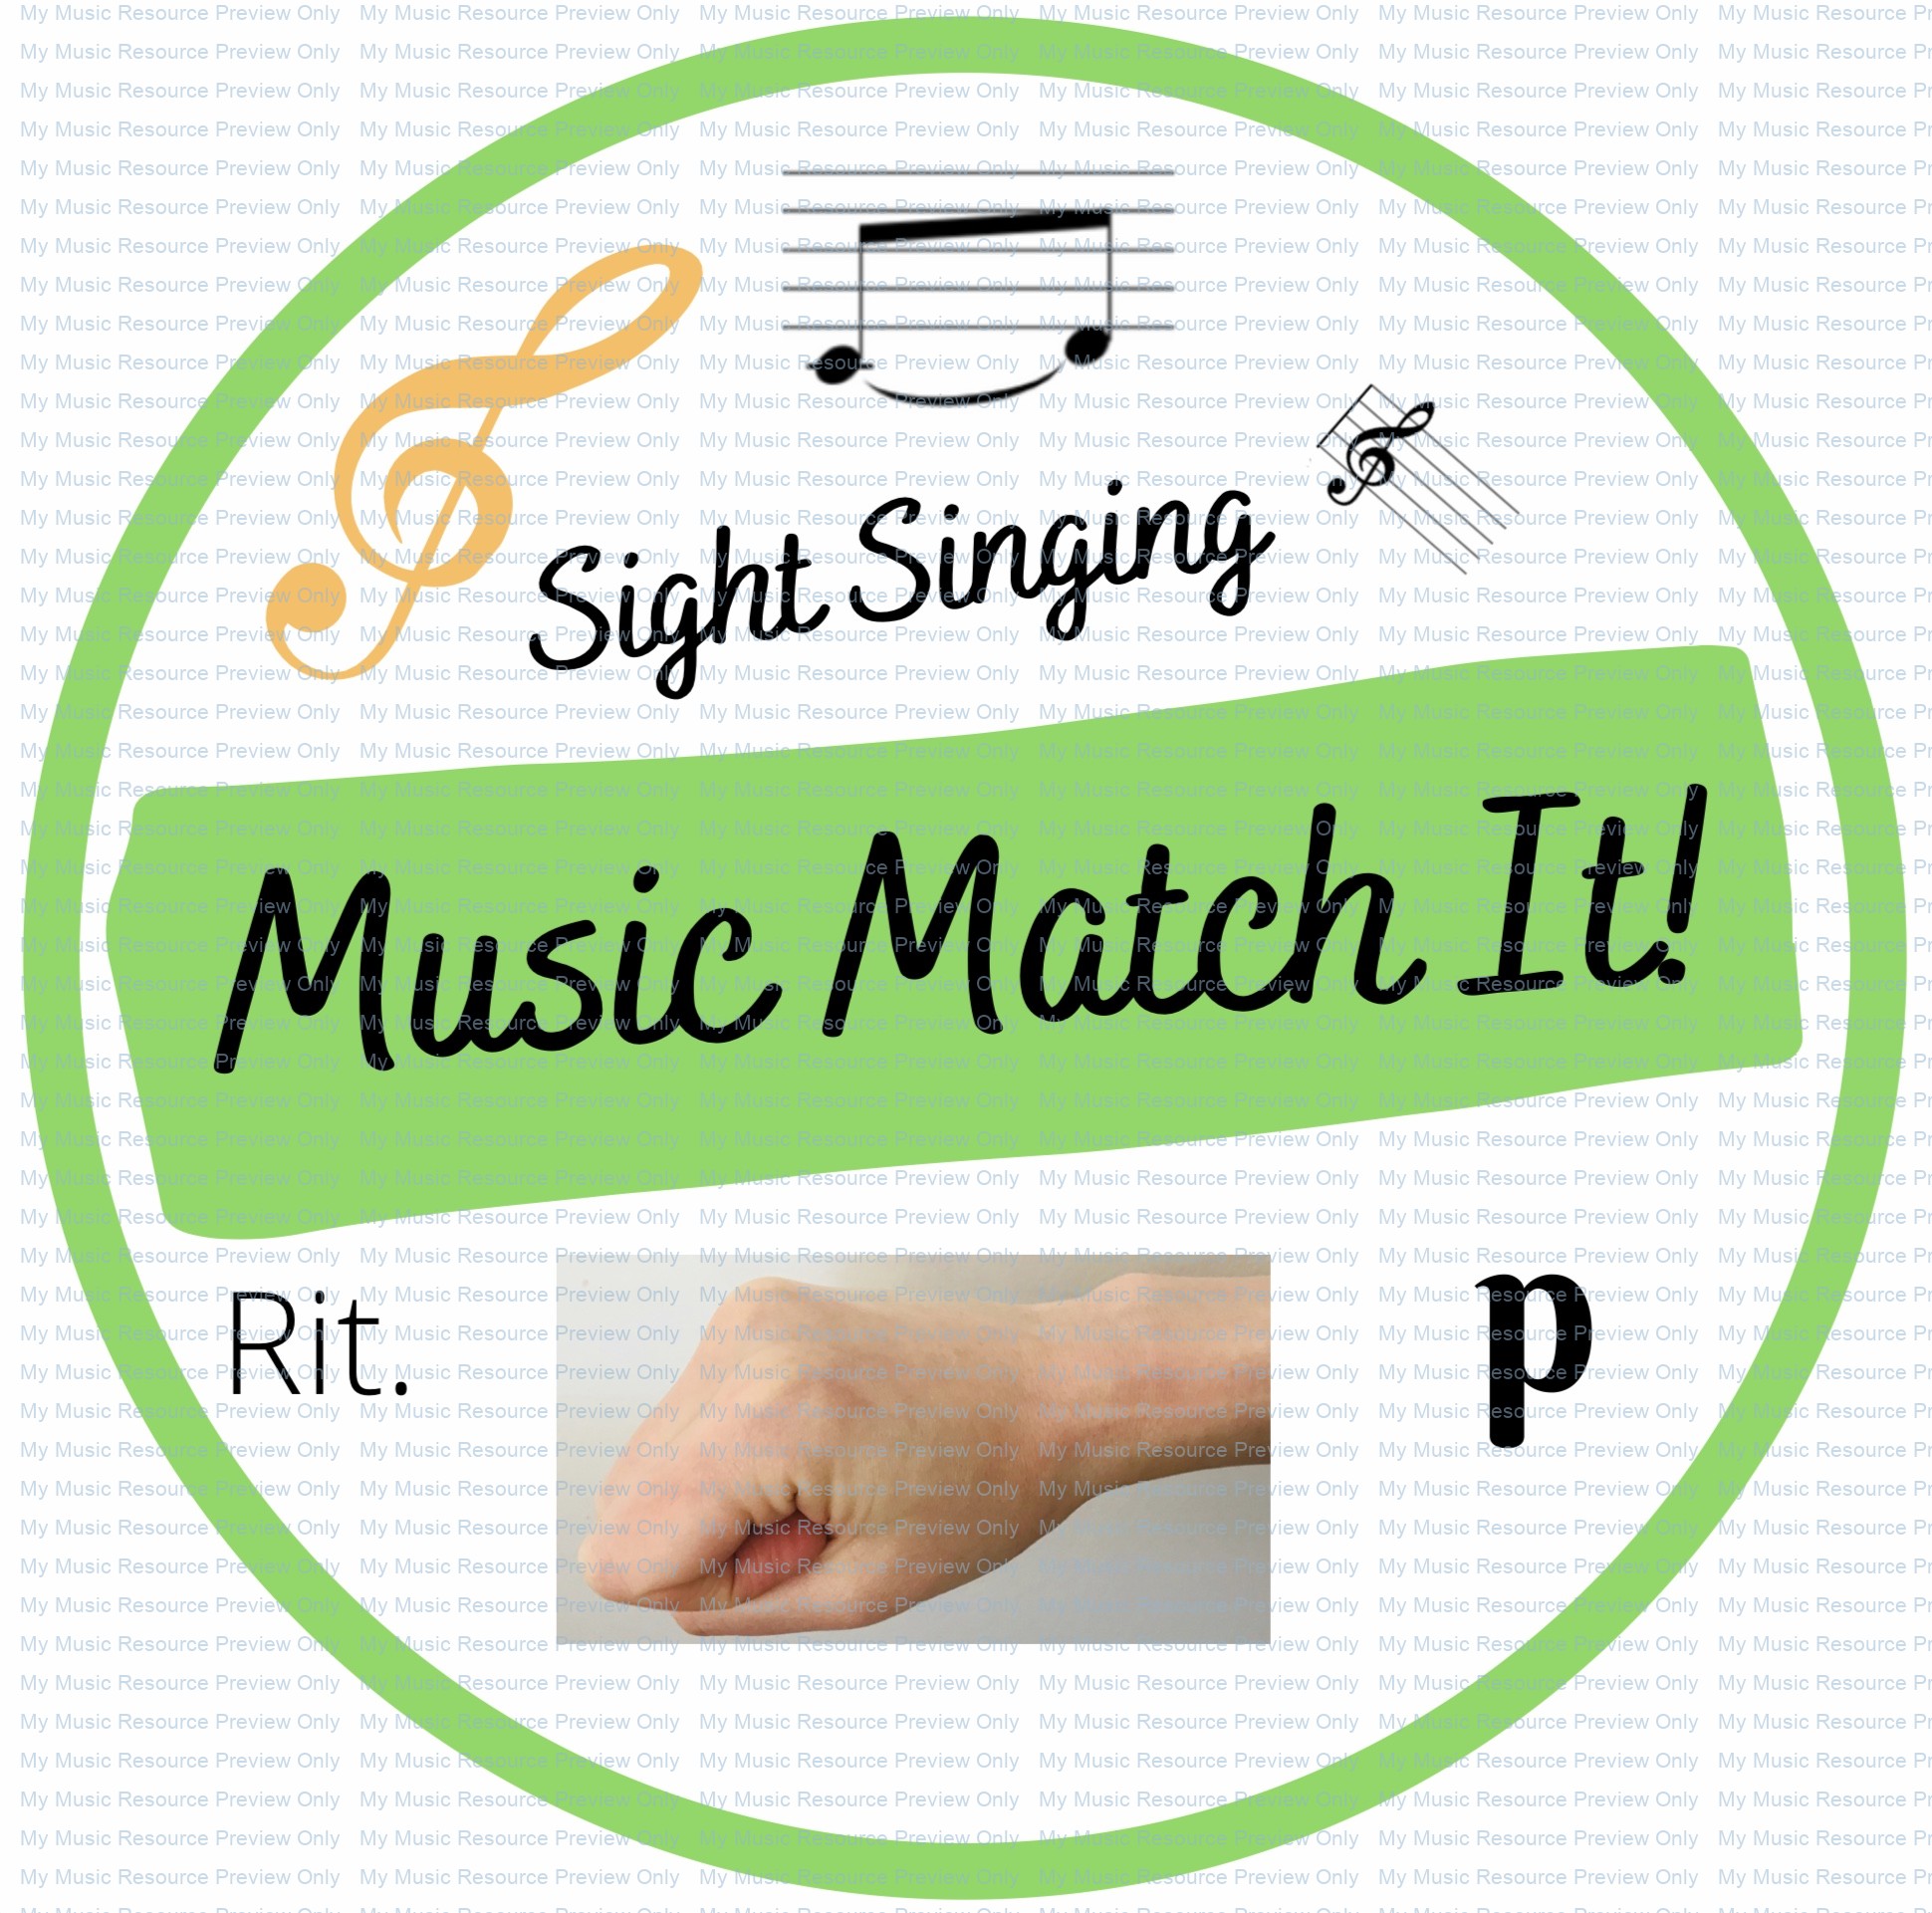 Music Match It! Grade 1 and Music Match It Sight Singing Edition, two card games for beginner level musicians